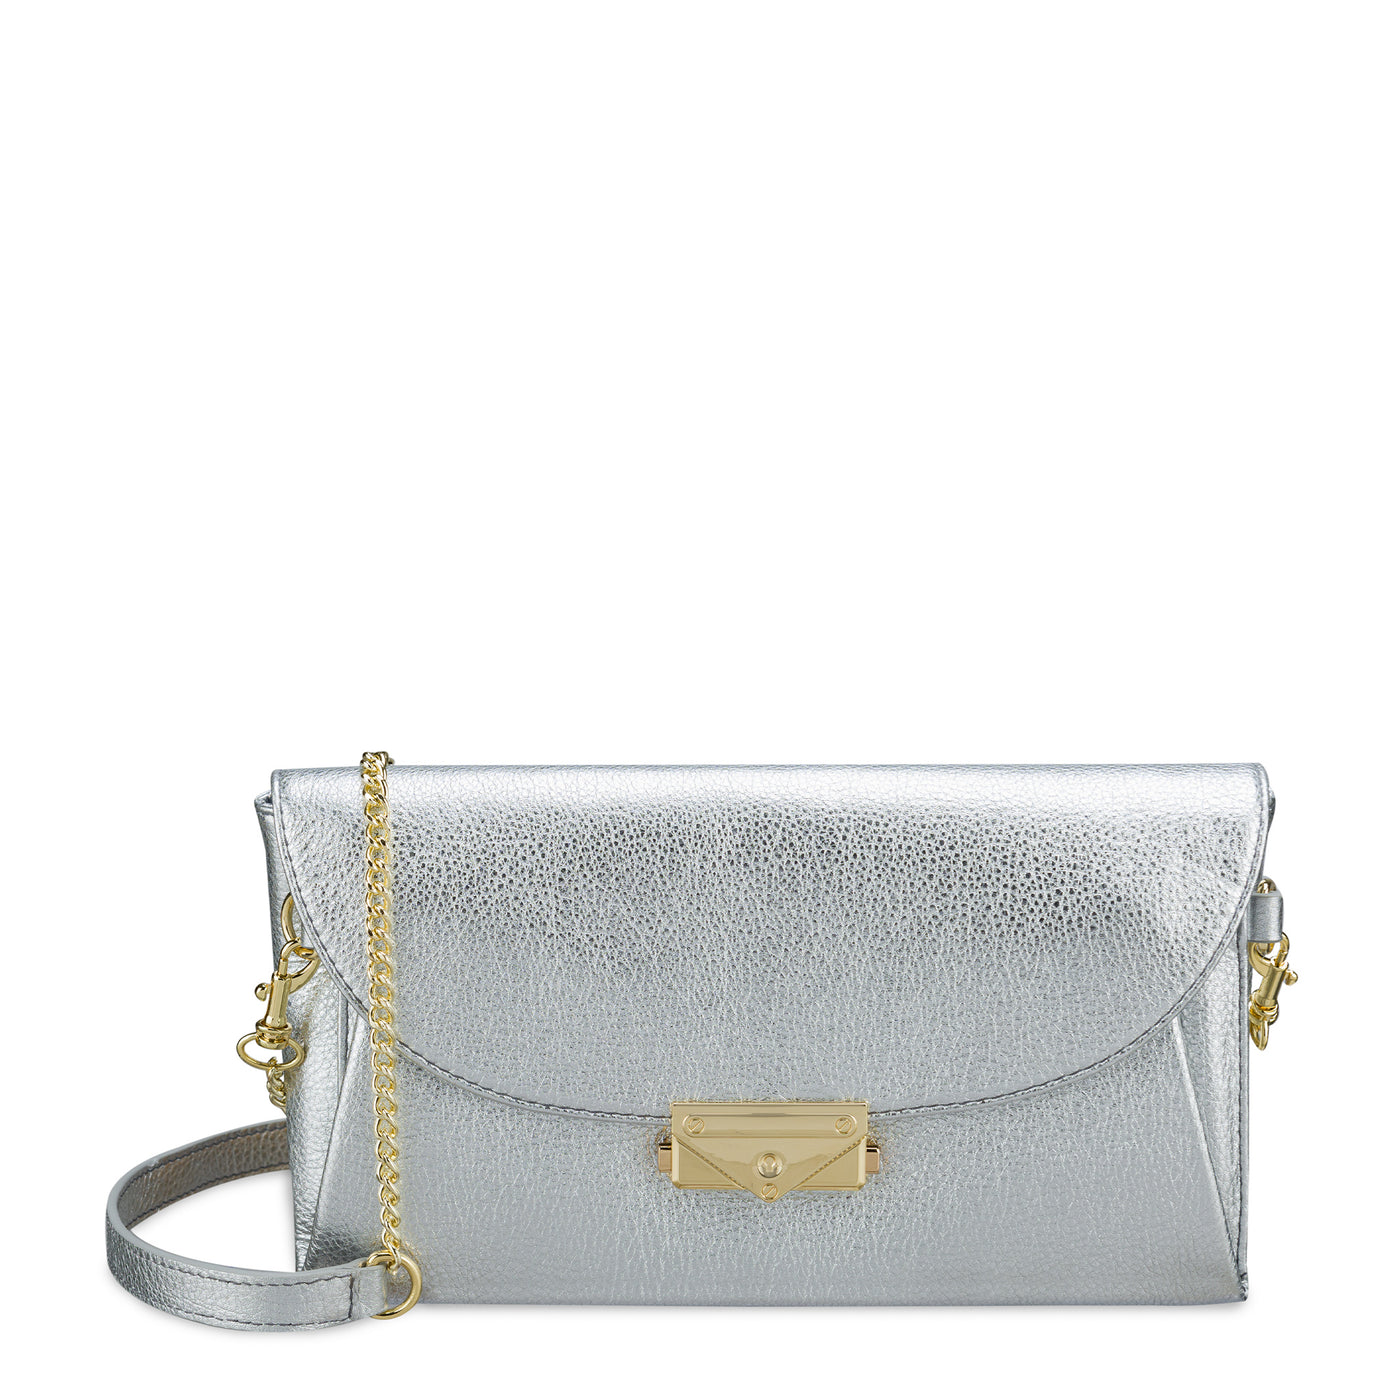 IRON TAILOR – New Sling Bag With Silver Zip